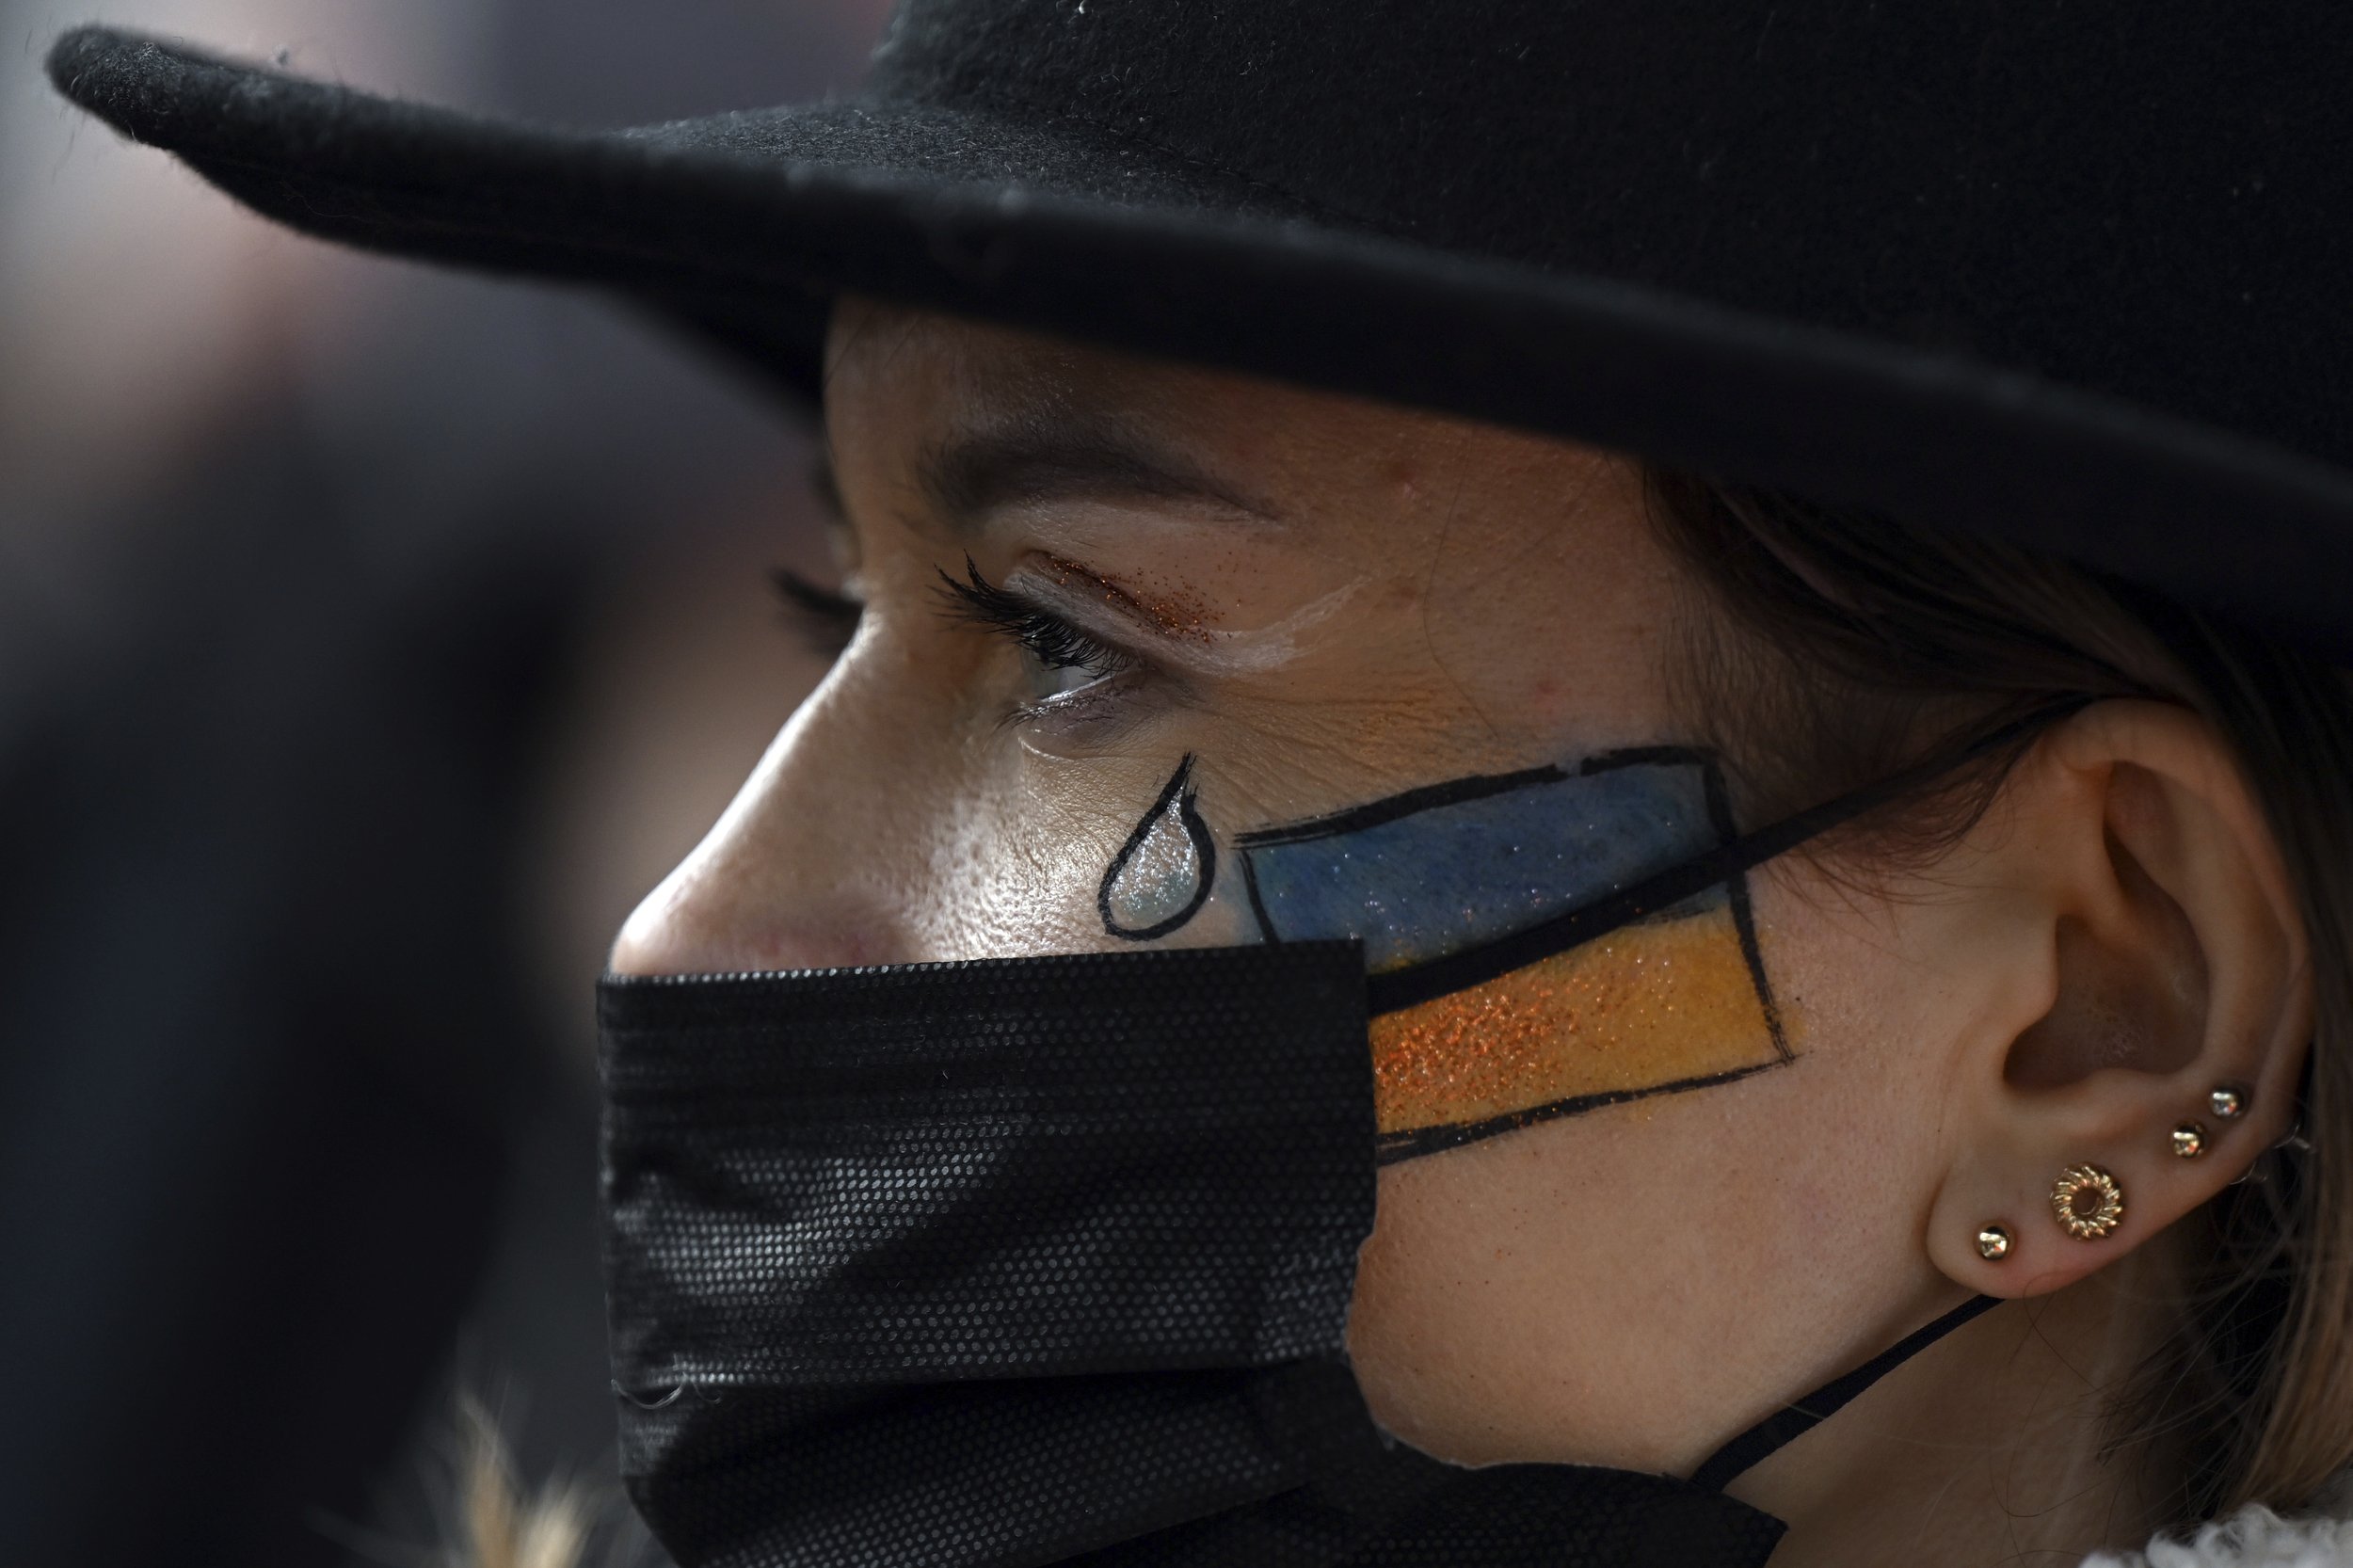  A woman with a Ukrainian flag and a tear painted on her face, takes part in a protest following Russian attack on Ukraine, in Cologne, Germany, Thursday, Feb. 24, 2022. (Federico Gambarini/dpa via AP) 